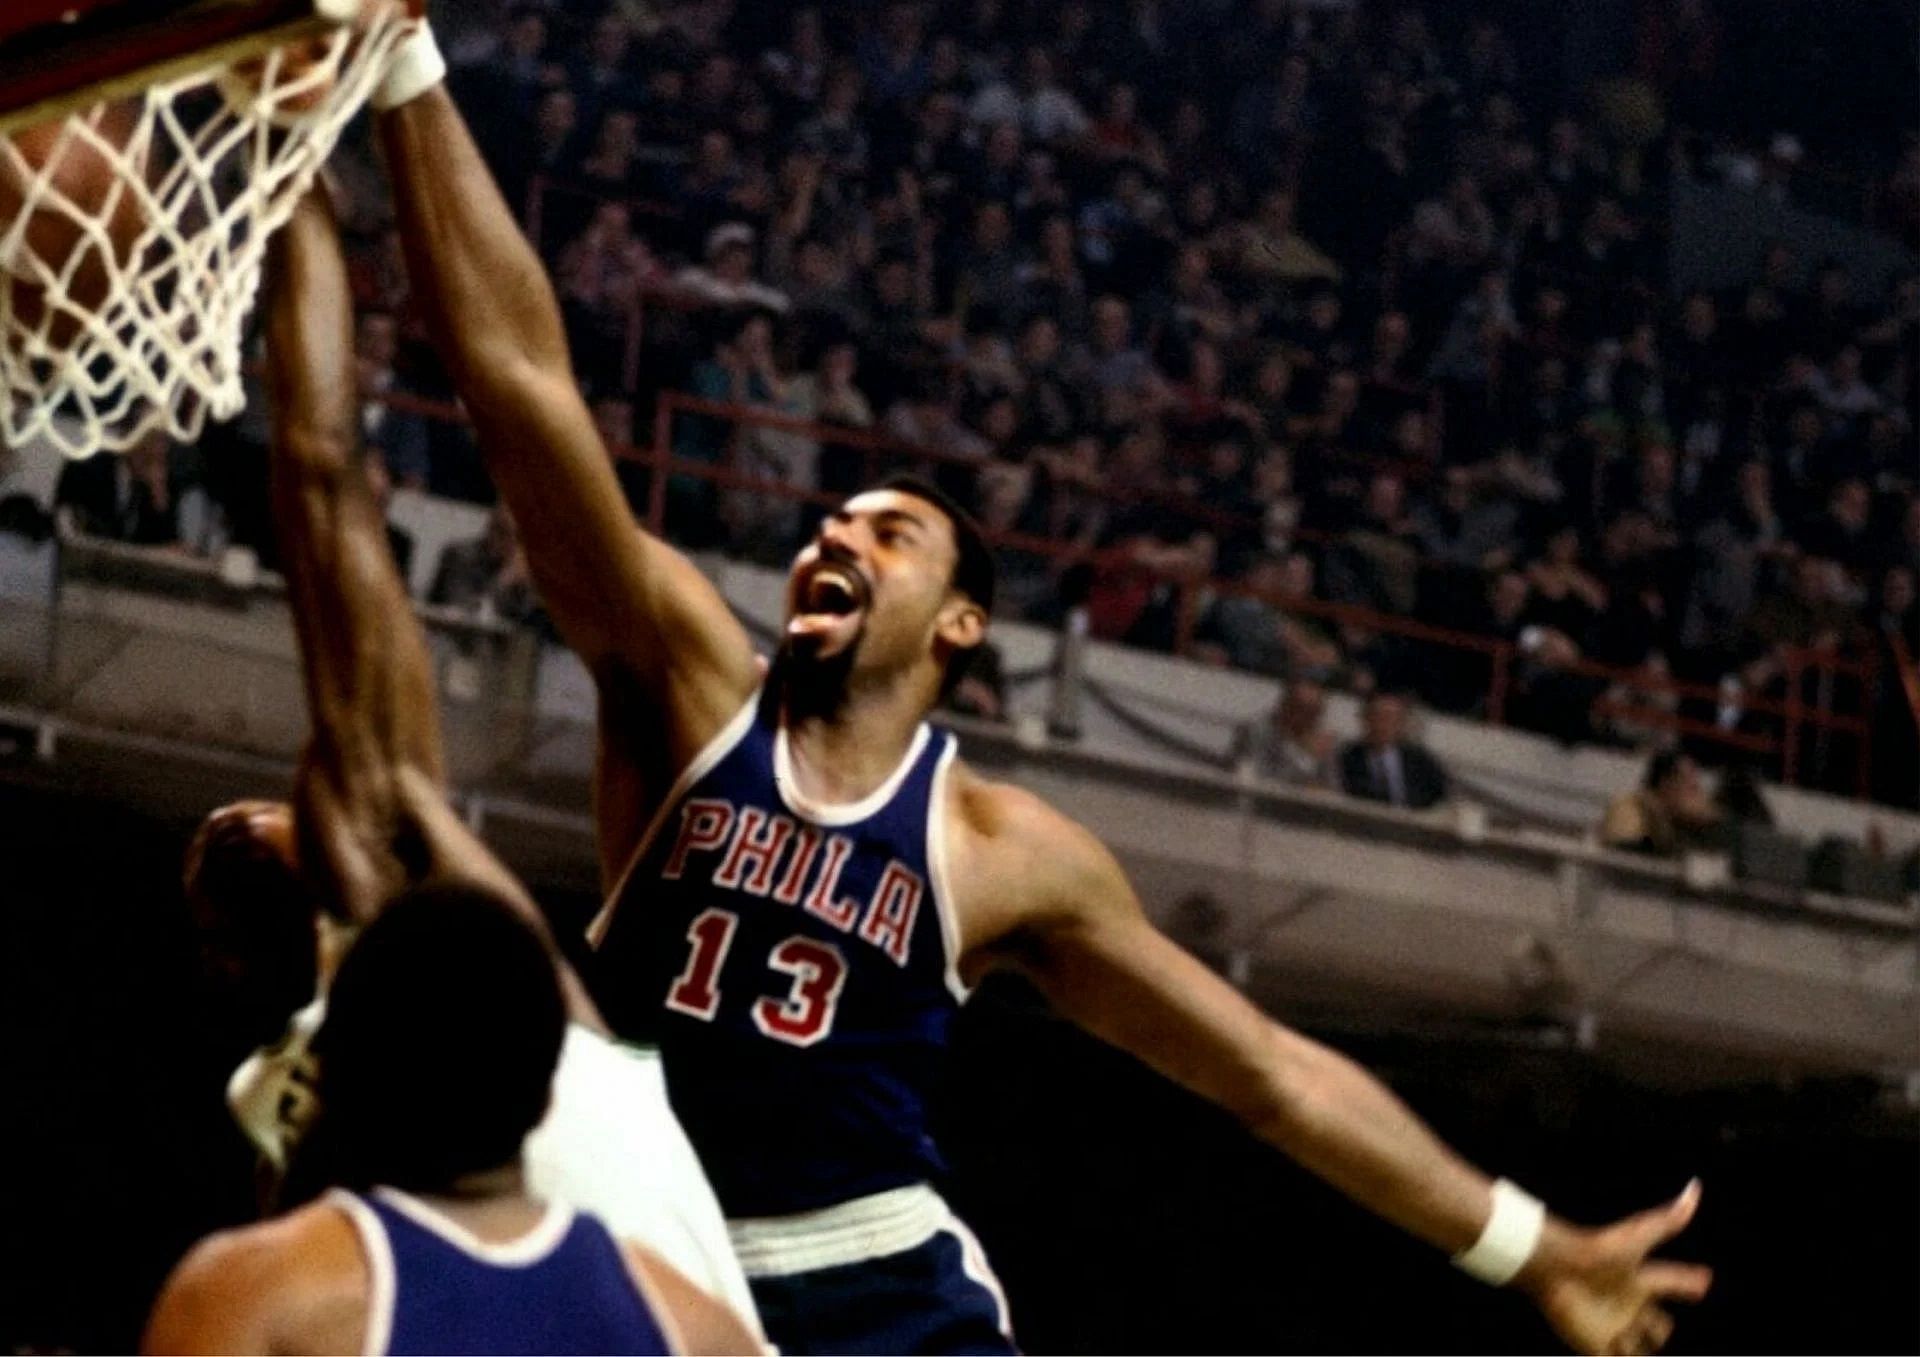 Wilt Chamberlain established the all-time record in most rebounds in game in NBA history with 55 in 1960.